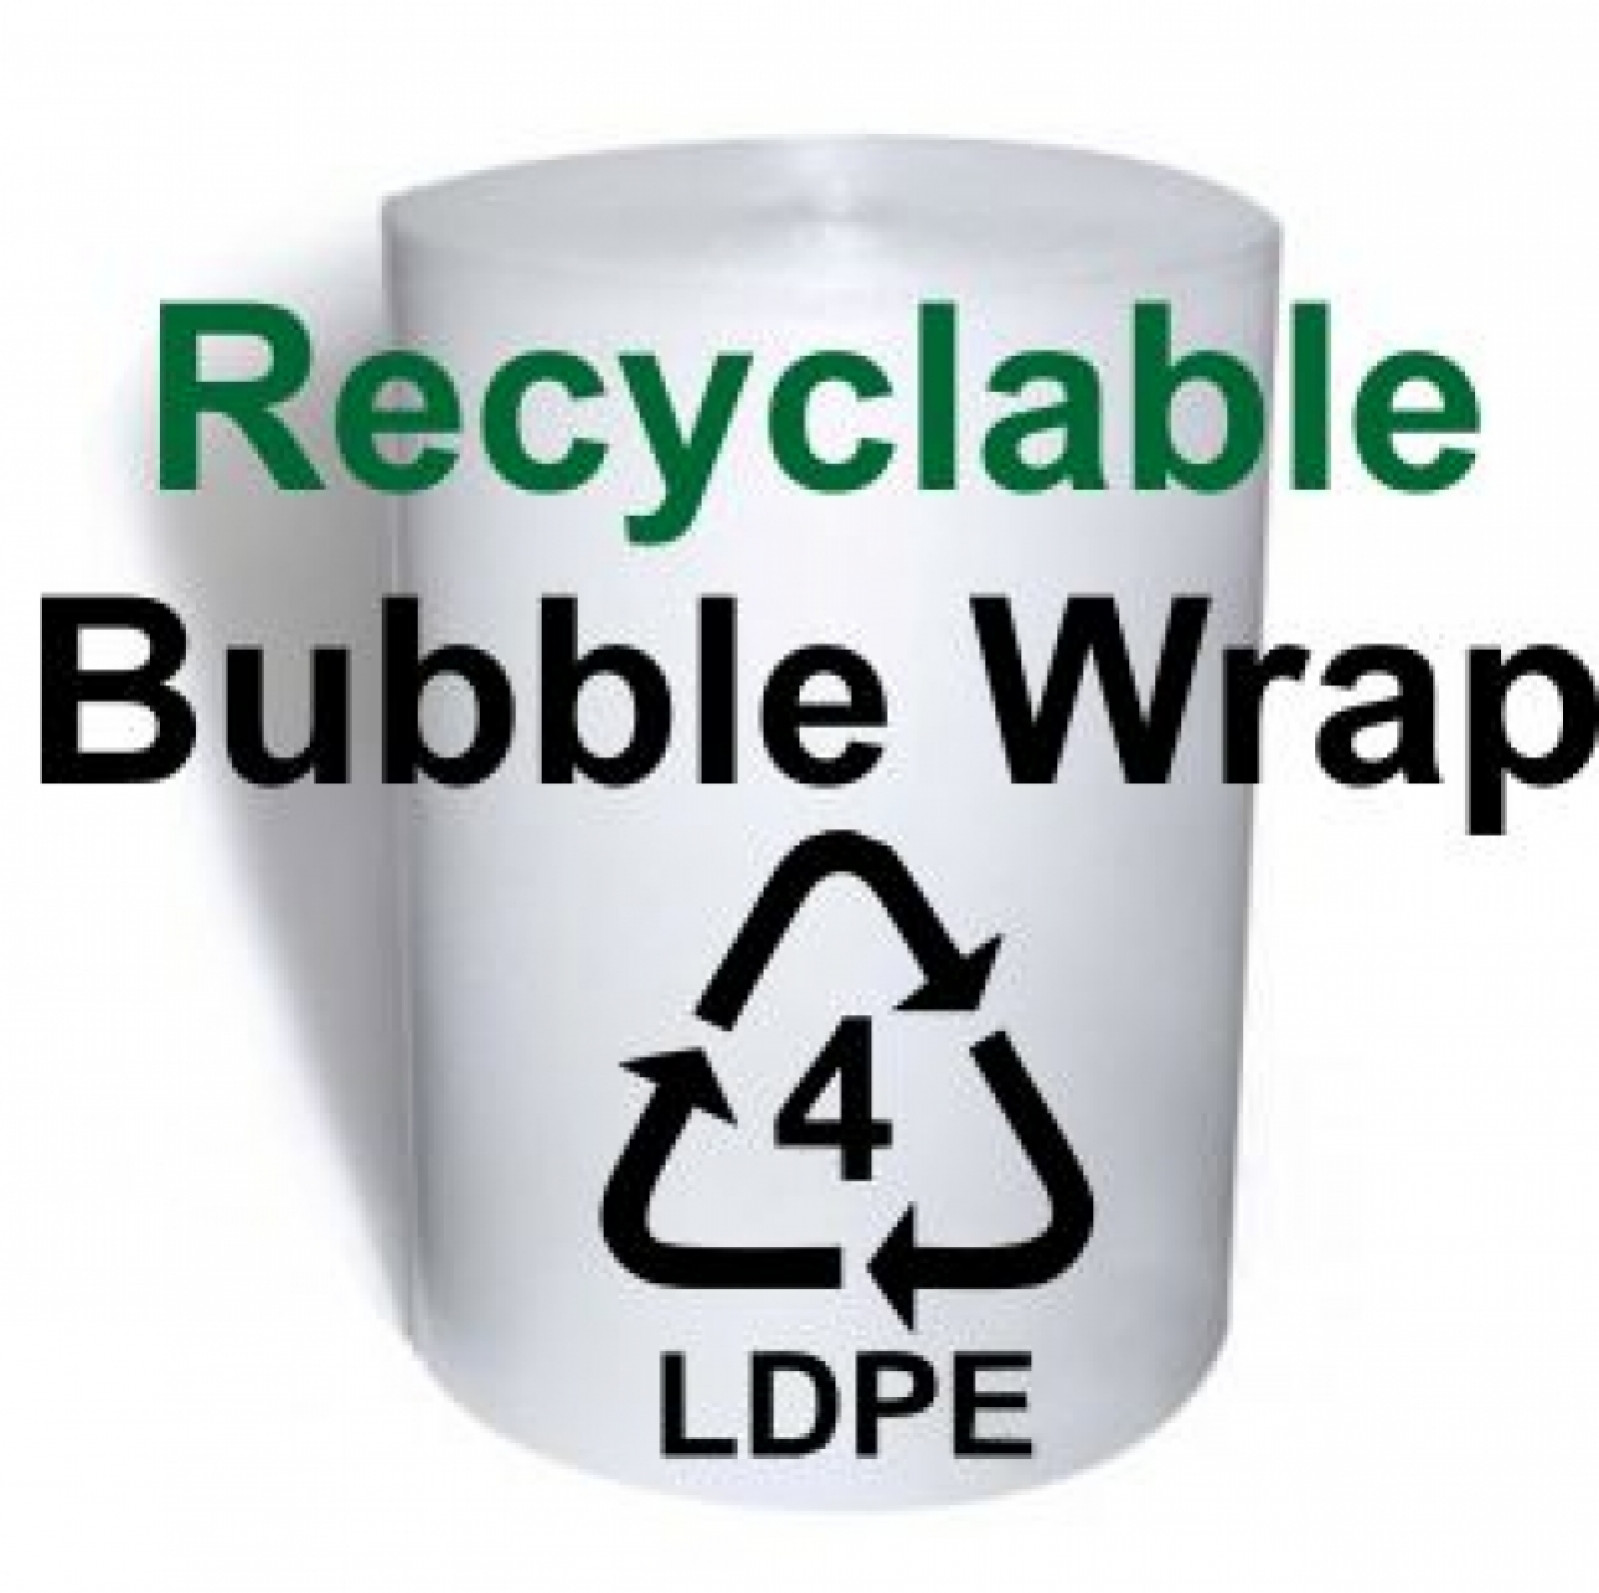 Recyclable Bubble Wrap from PH Flexible Packaging